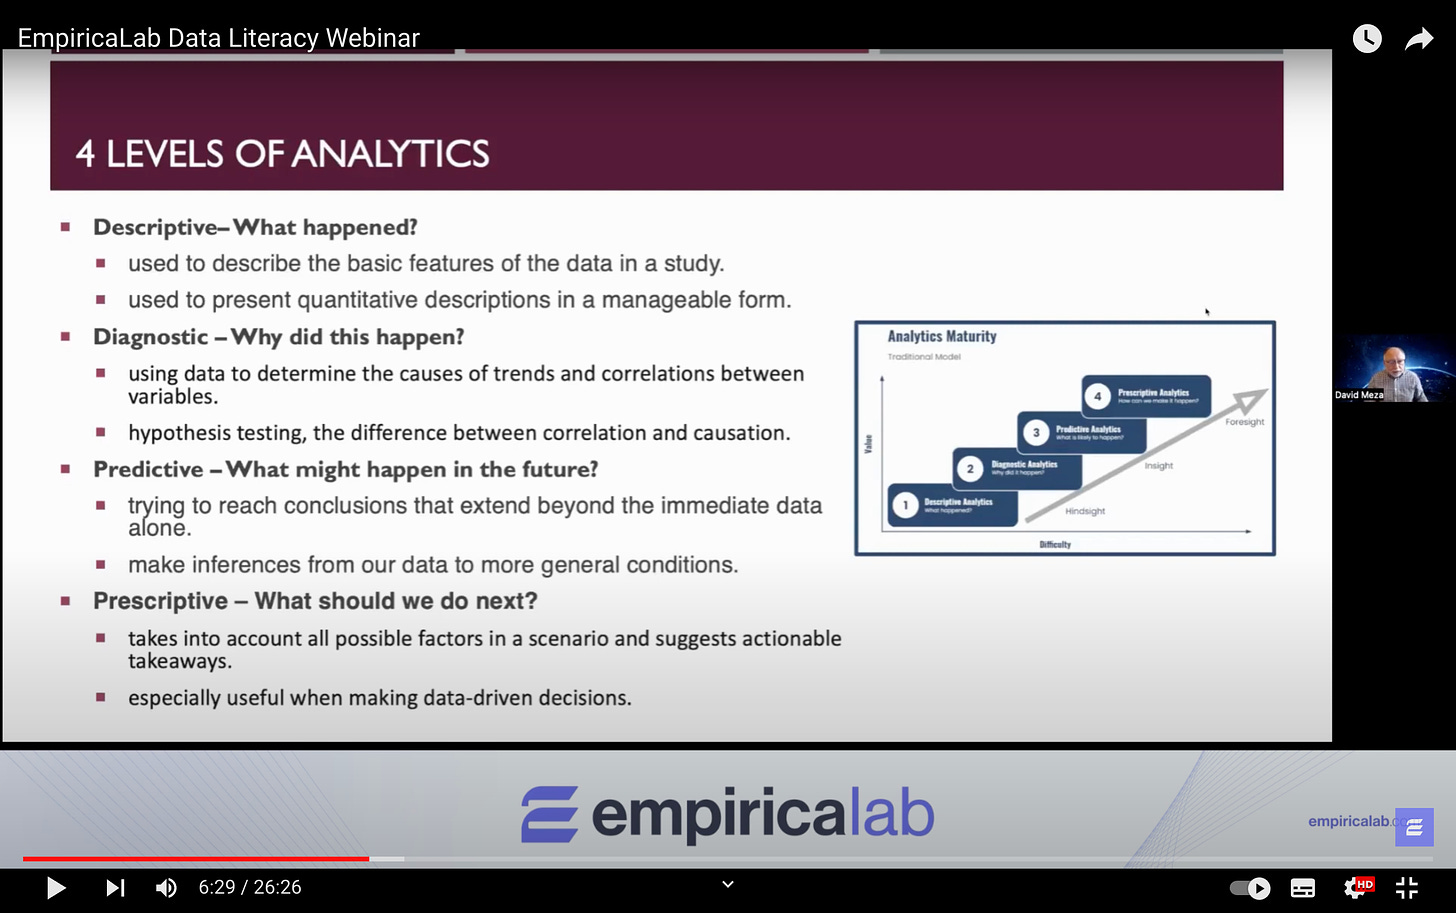 Slide from the webinar, showing the four levels of analytics: Descriptive = what happened?; Diagnostic = Why did this happen?; Predictive = What might happen in the future?; Prescriptive = What should we do next?